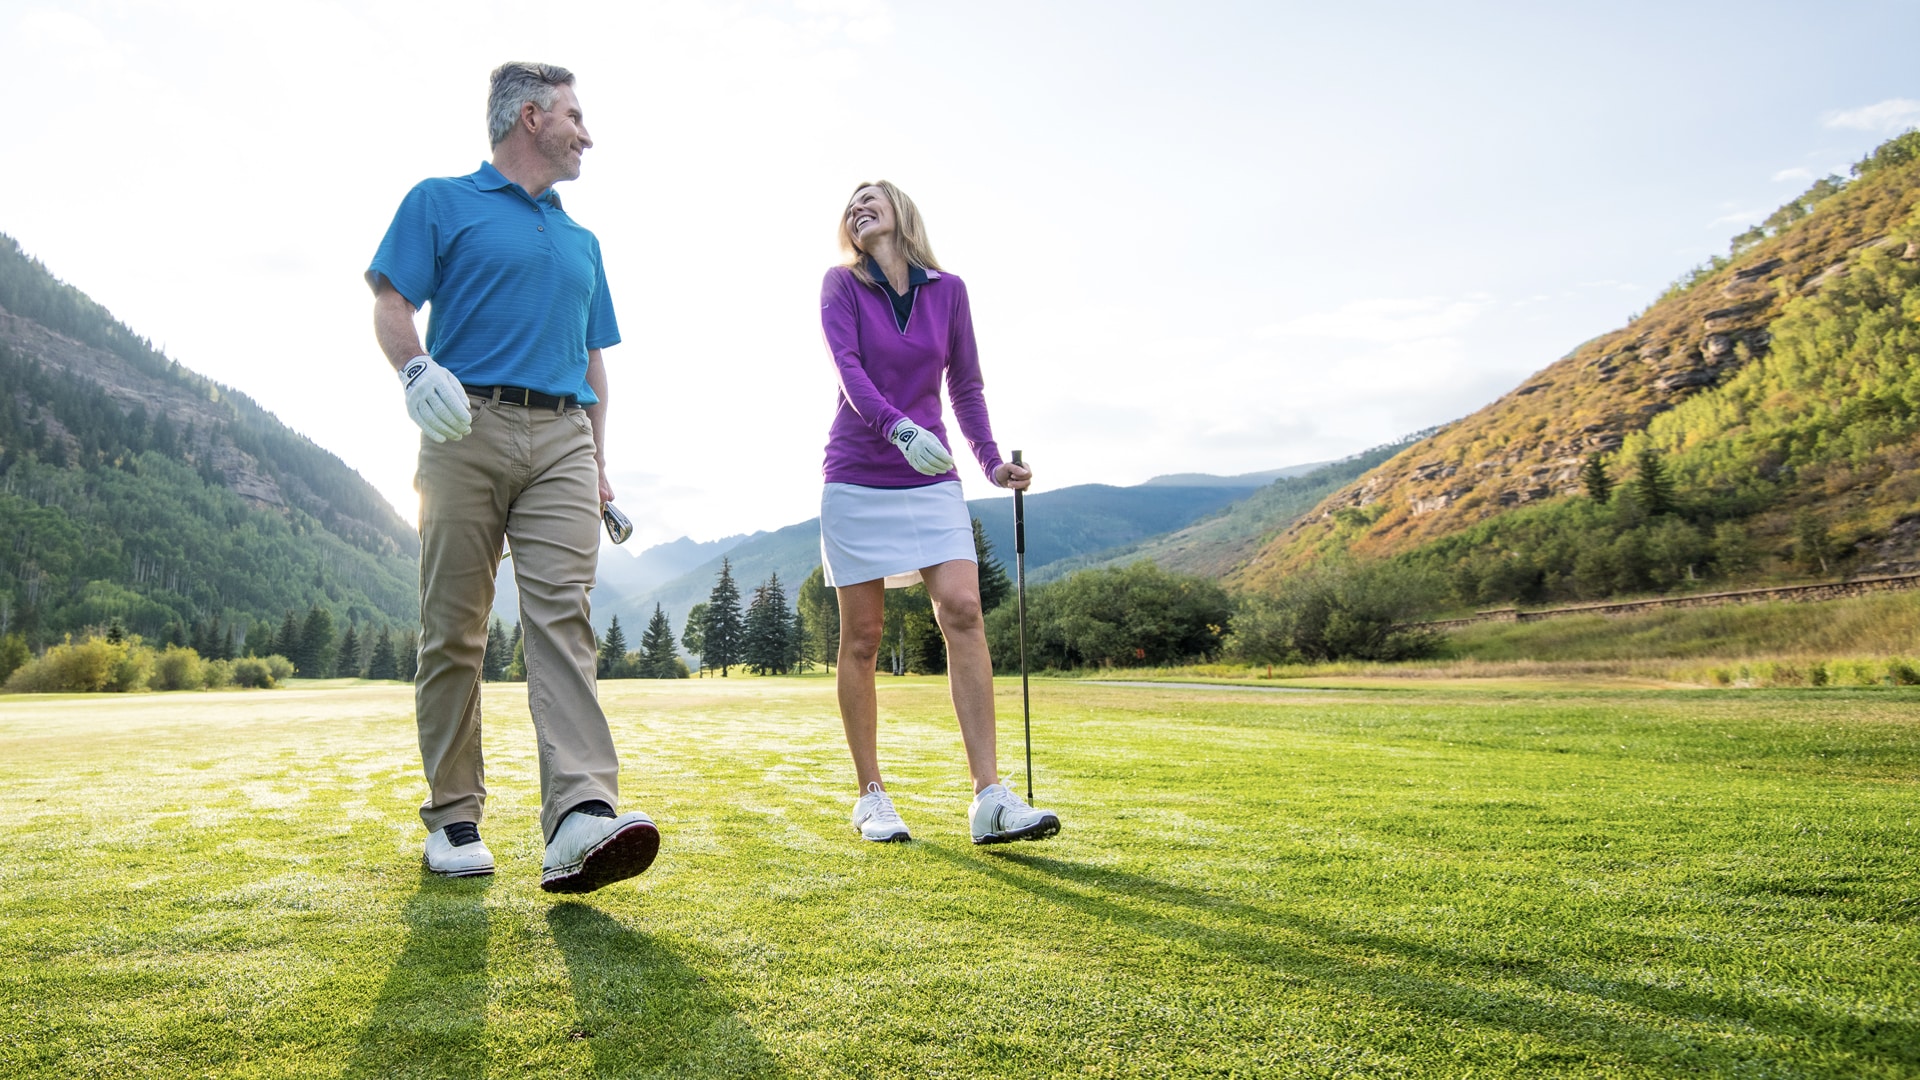 A man and woman walking on a golf course with mountains in the background.